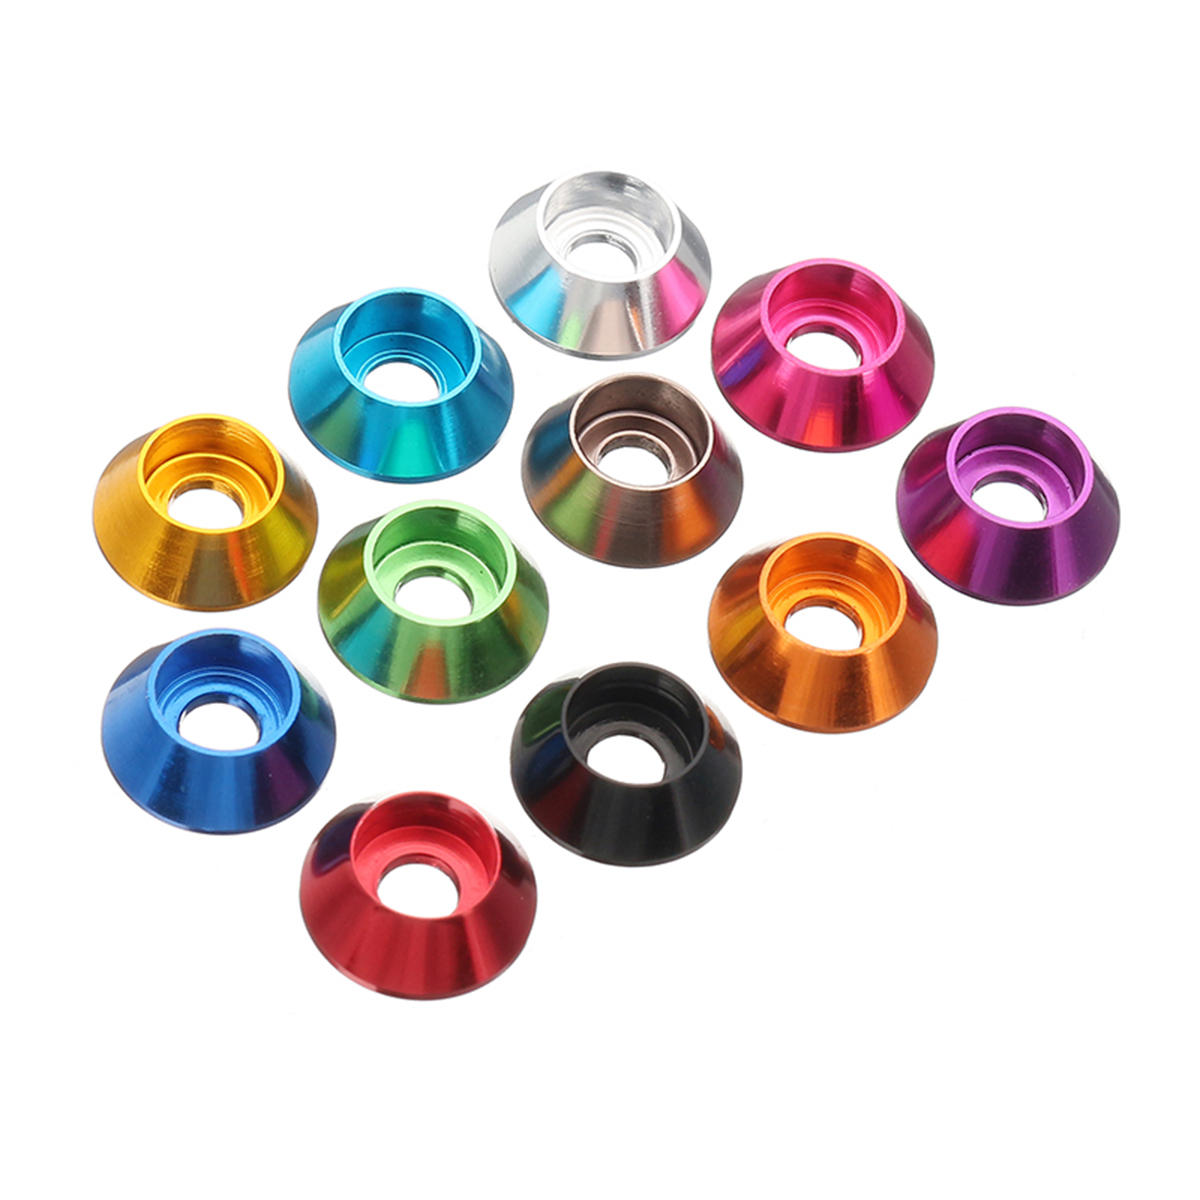 Suleve™ M2.5AN1 10Pcs M2.5 Cup Head Hex Screw Gasket Washer Nuts Aluminum Alloy Multicolor